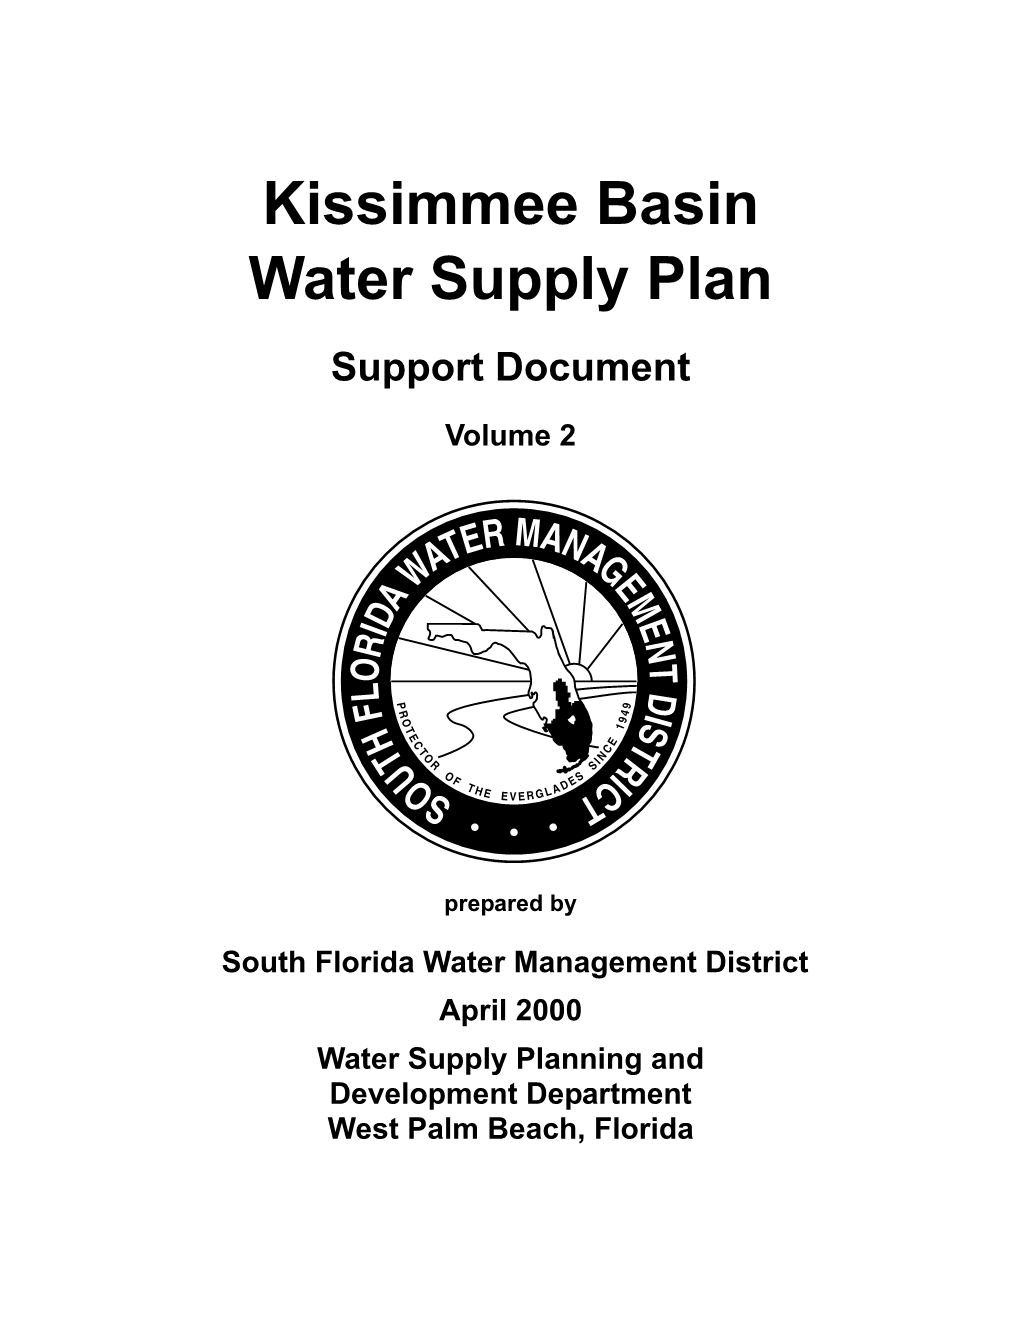 Kissimmee Basin Water Supply Plan Support Document